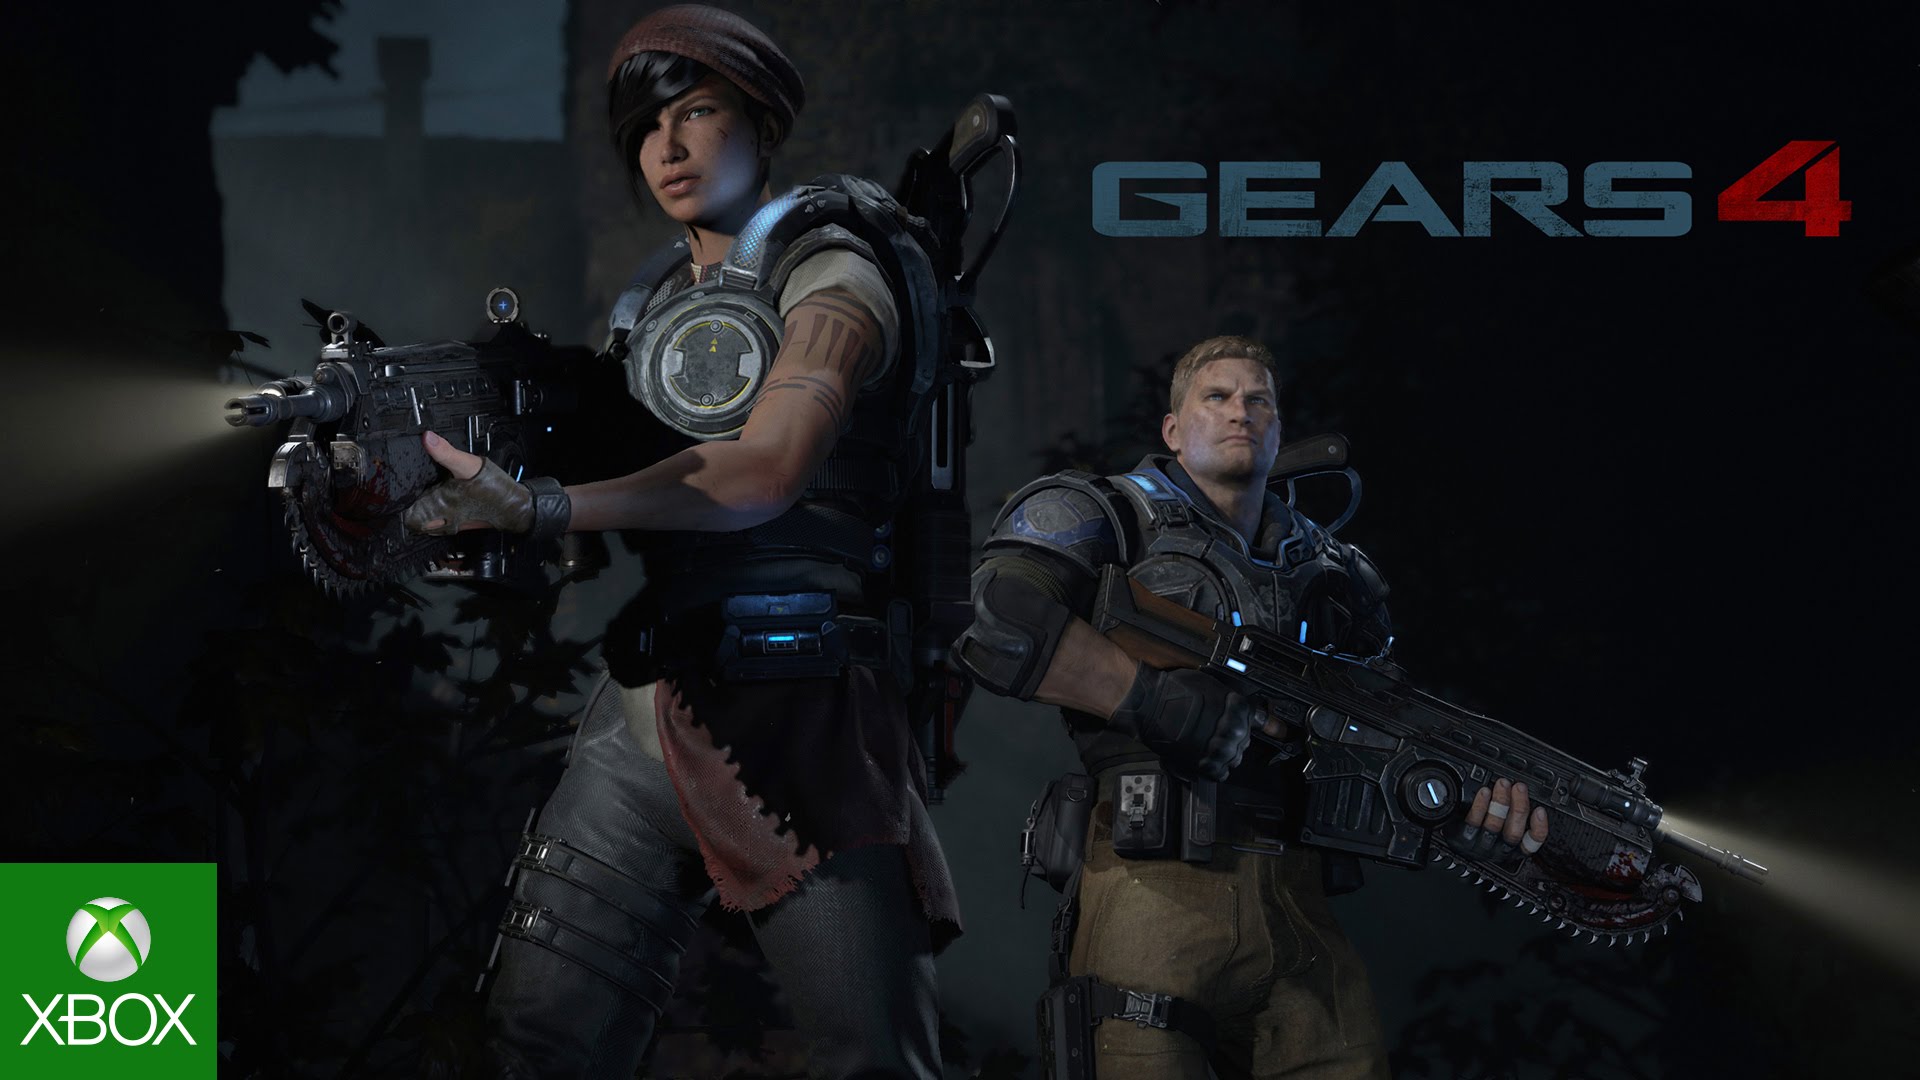 Gears of War' looks like the next game to get an Xbox One remaster